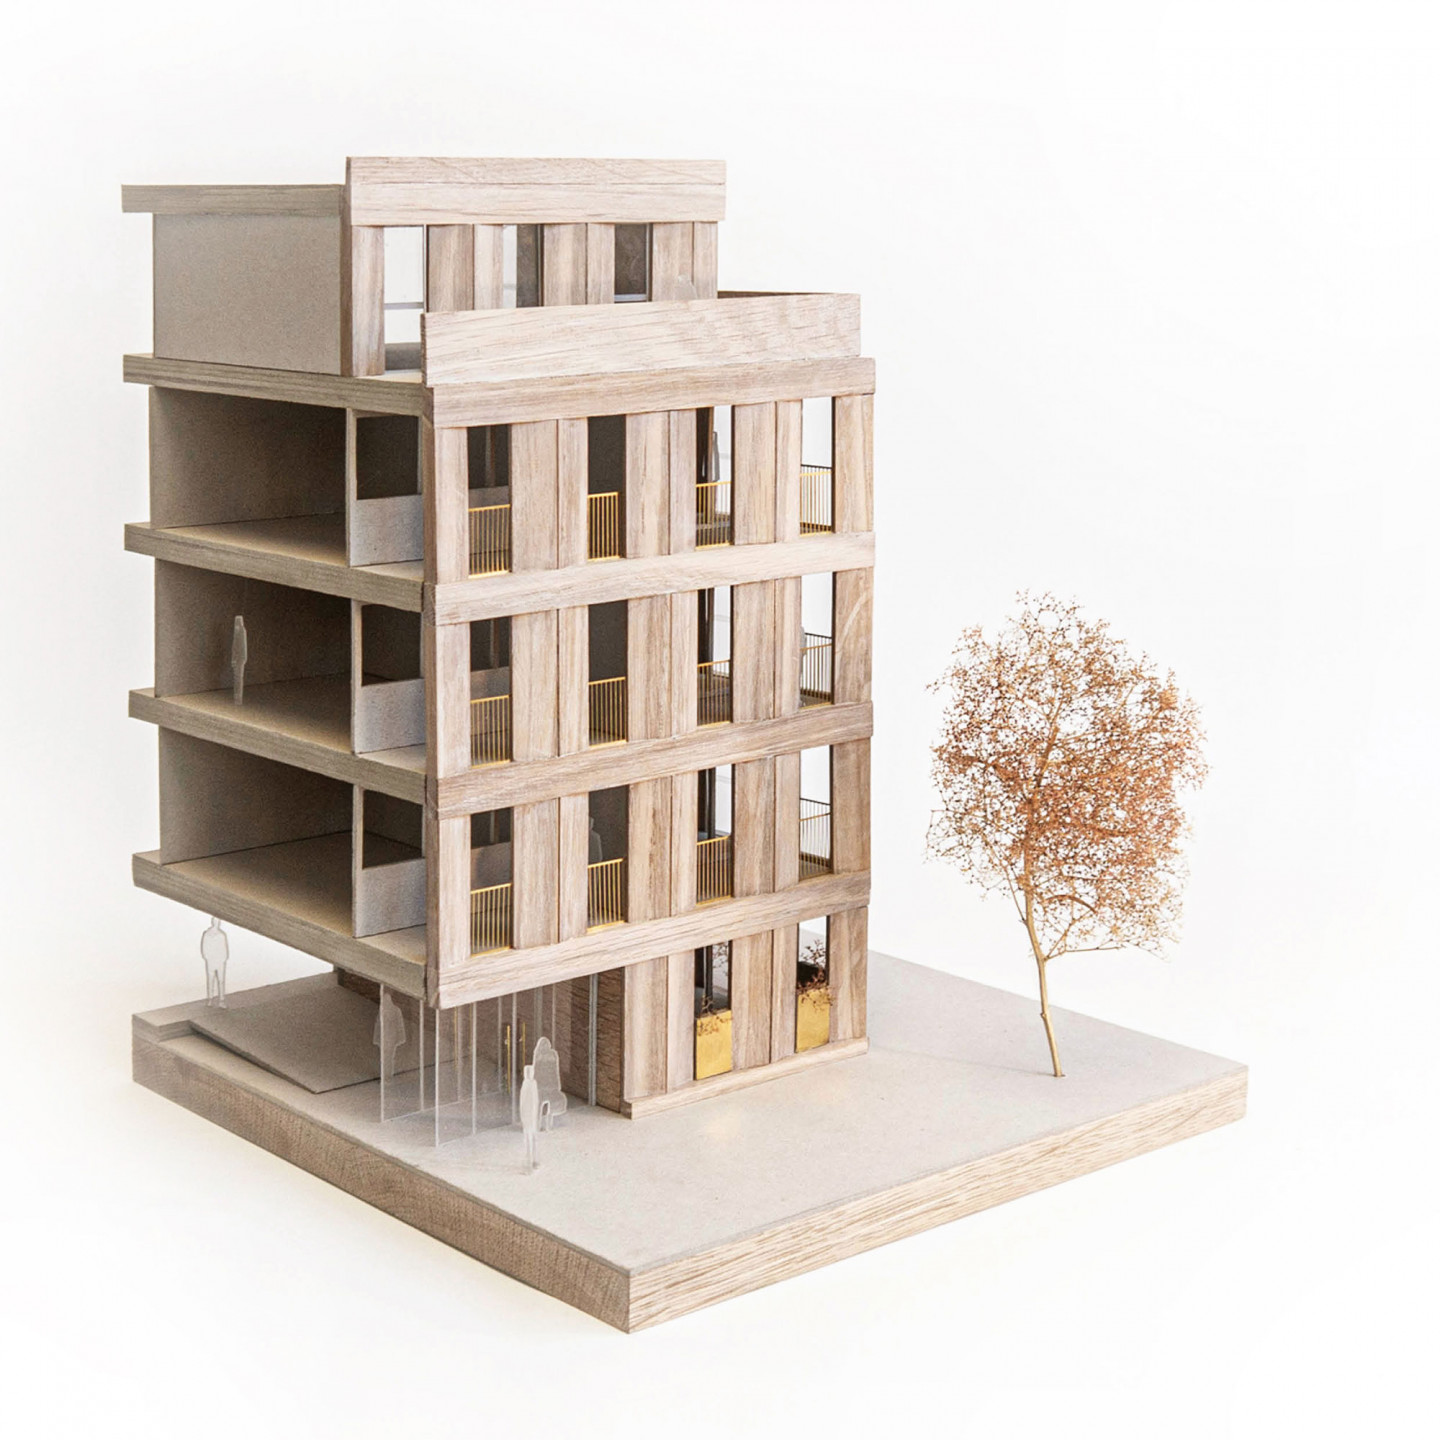 Social Housing Project for Pembury Estate in Hackney by Mowatt & Company. Made fromoak, card and etched metal.